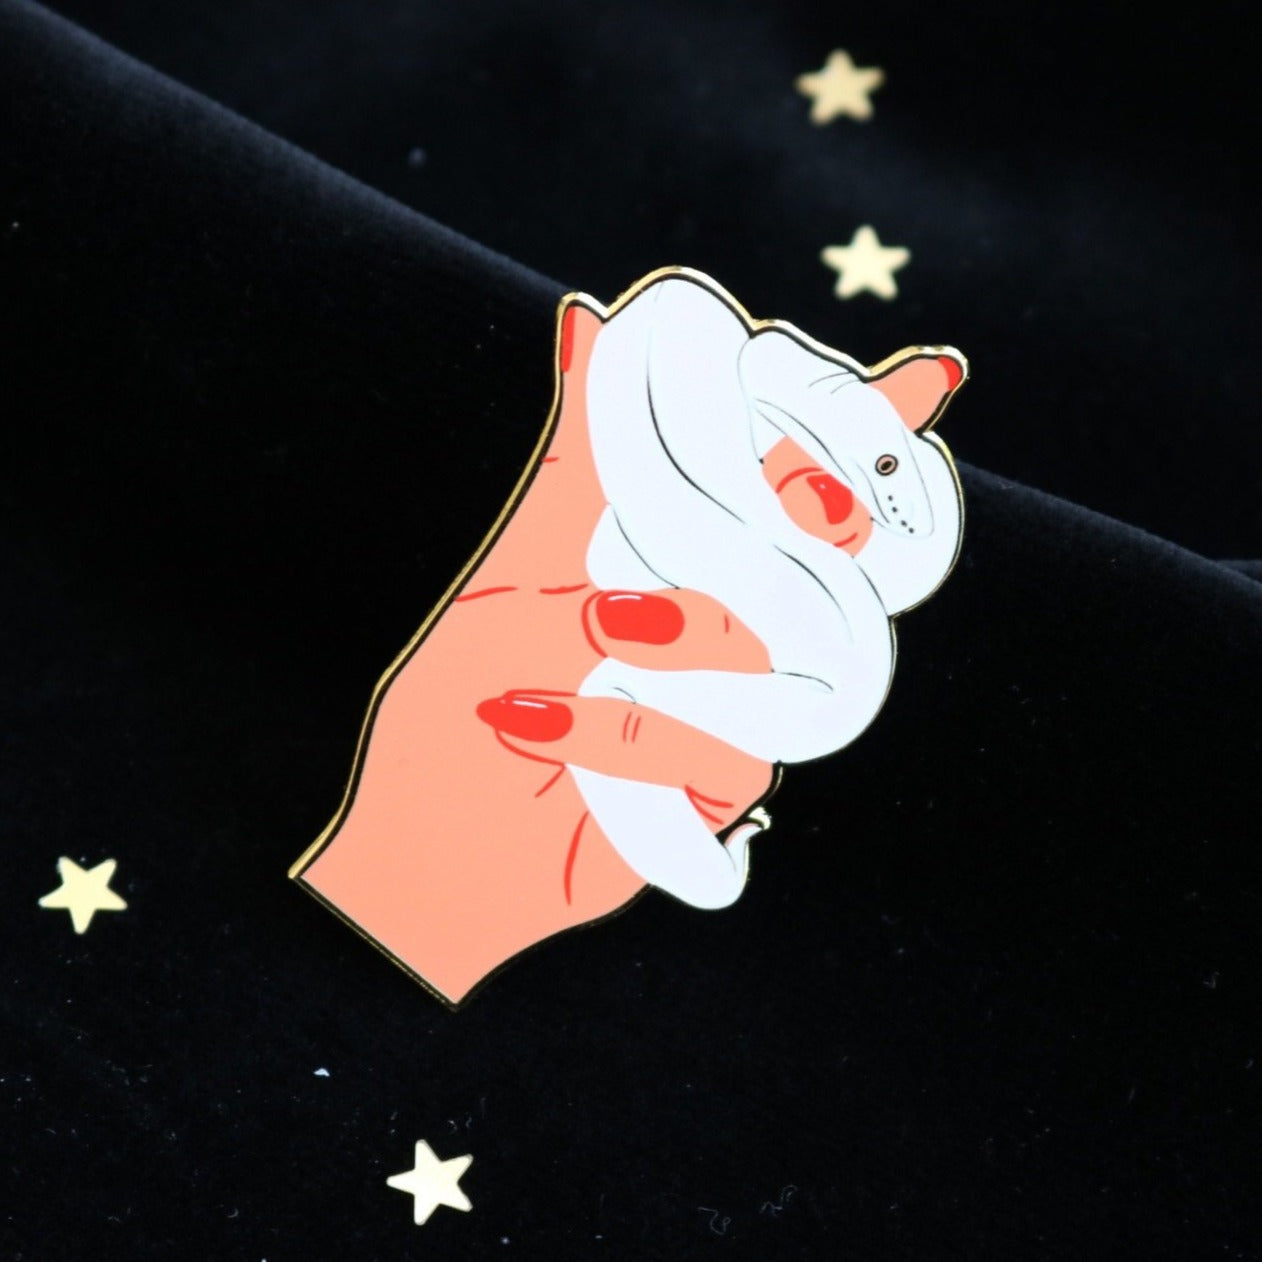 image of an enamel pin of a hand holding a white snake. the pin is on a black velvet background which is dotted with confetti stars